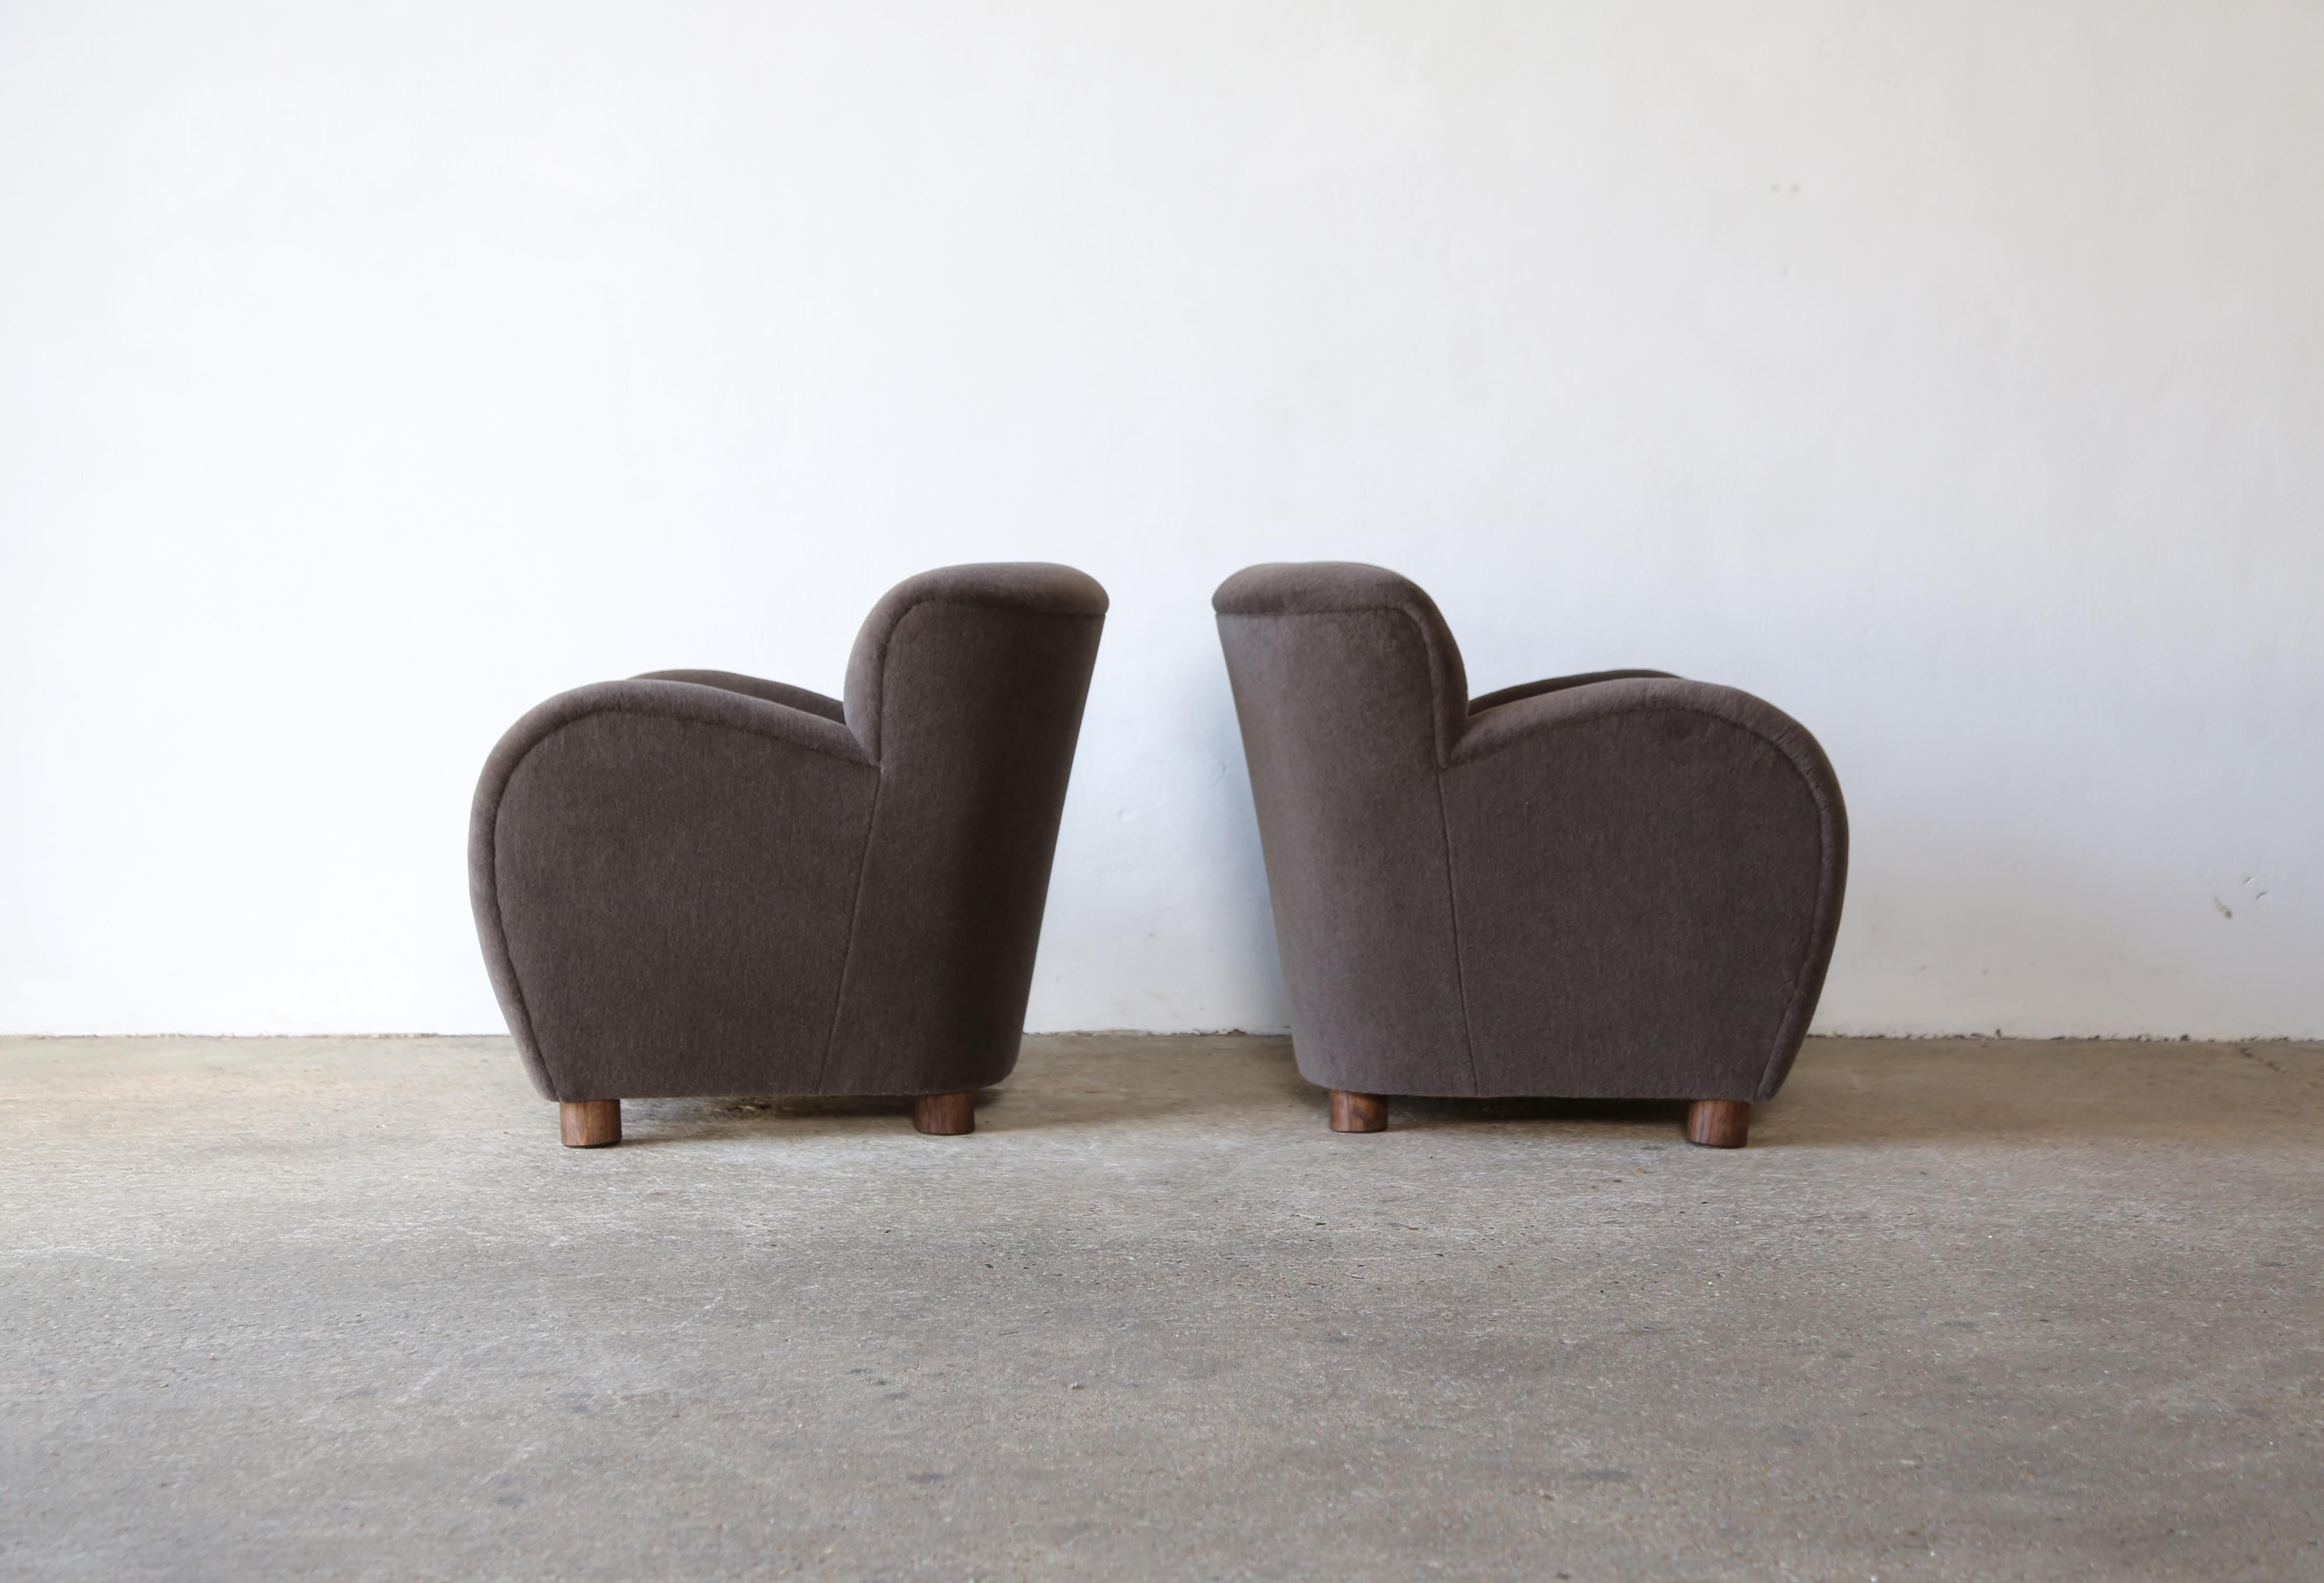 Superb Pair of Lounge Chairs, Upholstered in Pure Alpaca In Good Condition For Sale In London, GB